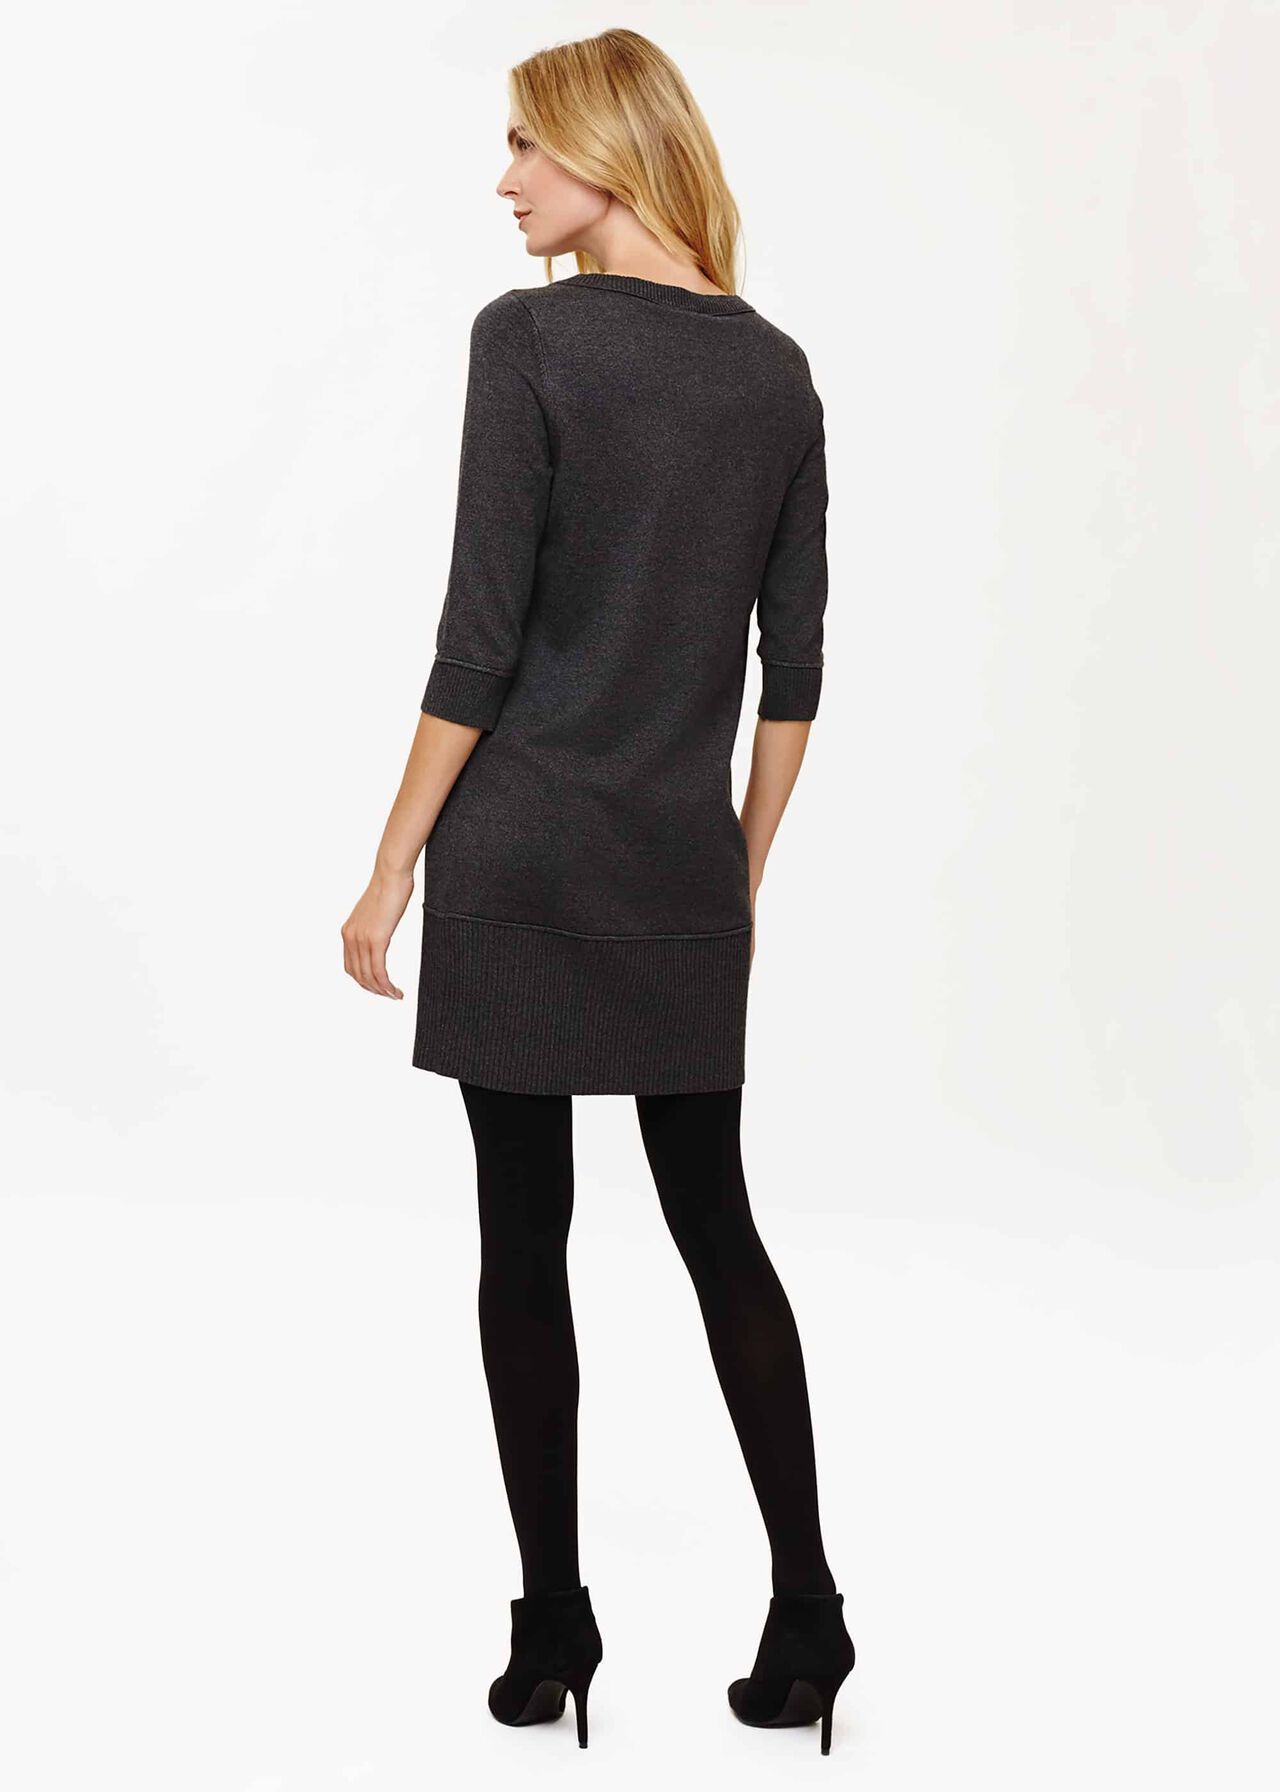 Shiloh Exposed Seam Knitted Dress